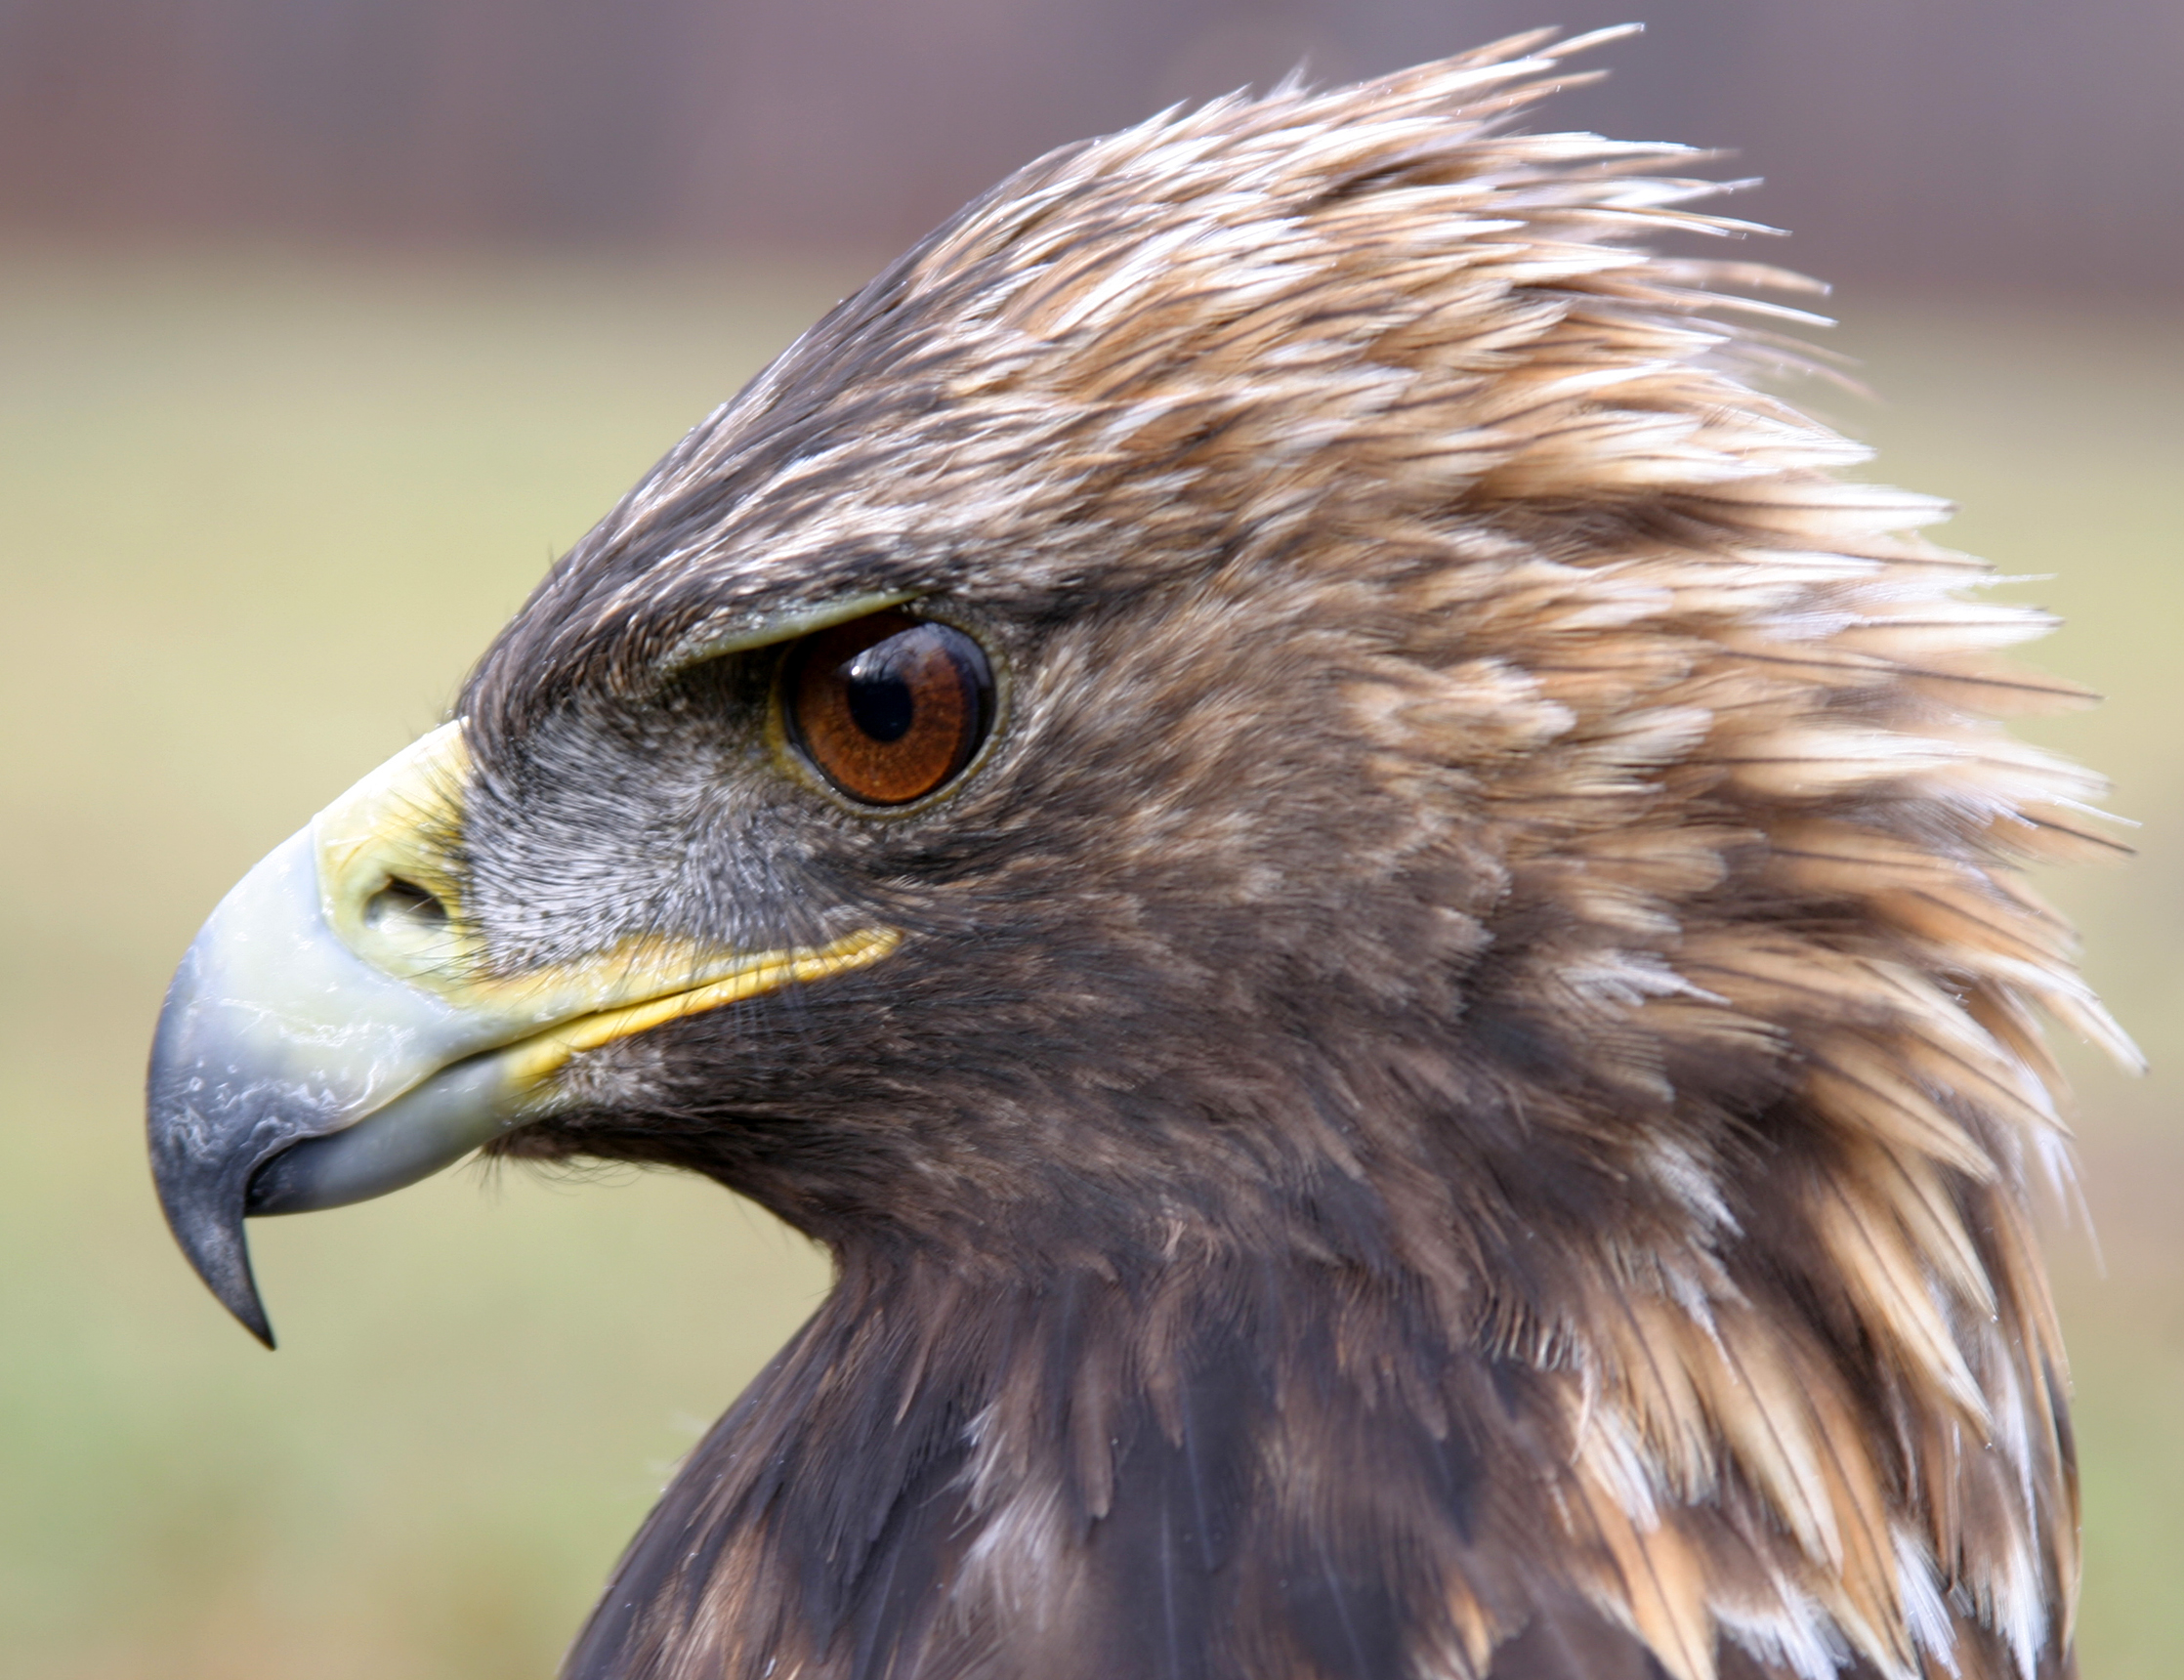 Genome yields insights into golden eagle vision, smell - Purdue University